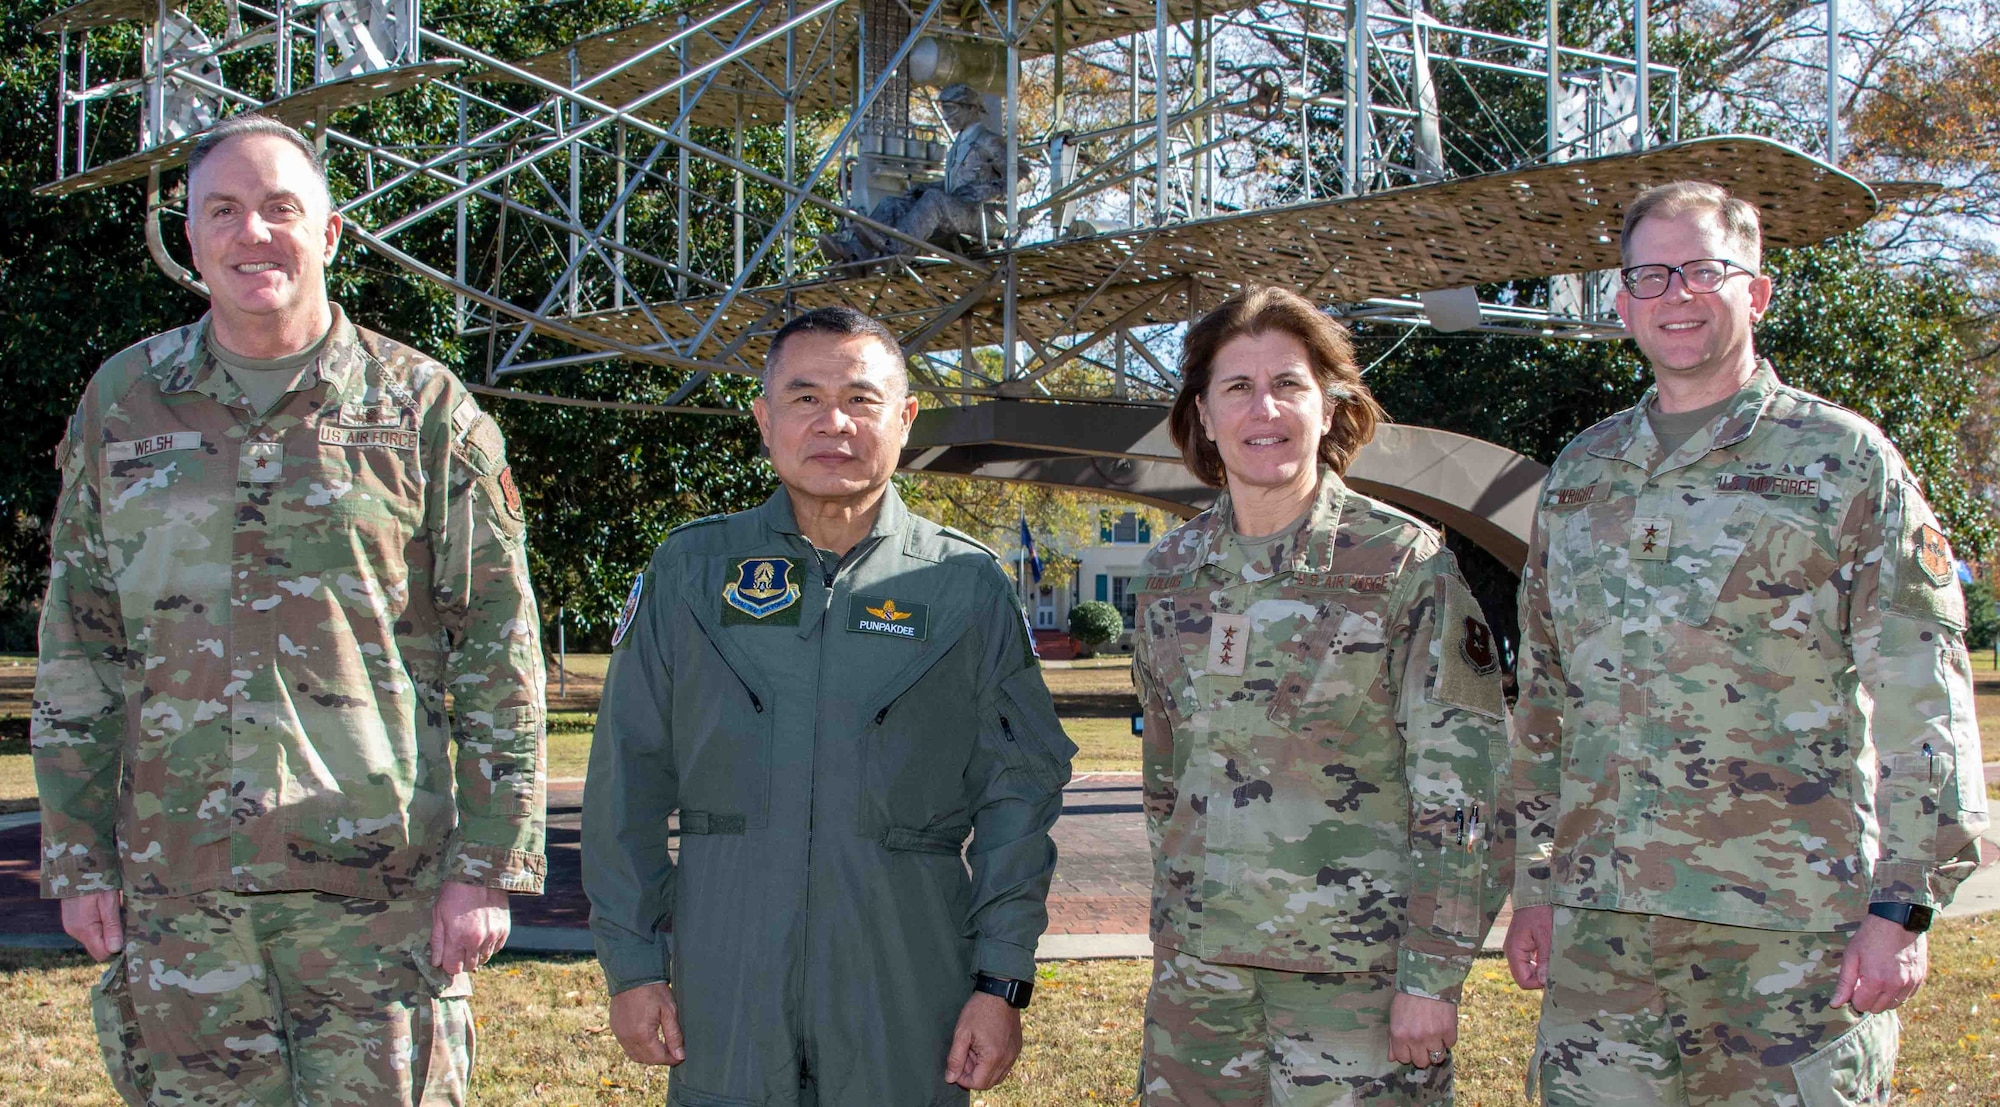 Royal Thai Air Force Commander-in-Chief Air Marshal Punpakdee Pattanakul (second from left) made his first visit to Air University and Maxwell Air Force Base, Alabama, Dec. 12, 2023, since assuming his position in October 2023. His visit was a continuation of the Chief of Staff of the Air Force Counterpart Visits. The visits facilitate key leader engagements and highlight the service’s units, organizations and installations. Pictured with Punpakdee are Lt. Gen. Andrea Tullos (third from left), Air University commander and president; Maj. Gen. Parker Wright (far right), Air University deputy commander, and commander, Curtis E. LeMay Center for Doctrine Development and Education; and escorting general officer Brig. Gen. Gent Wright Jr., assistant adjutant general and commander Washington Air National Guard, Camp Murray, Washington.